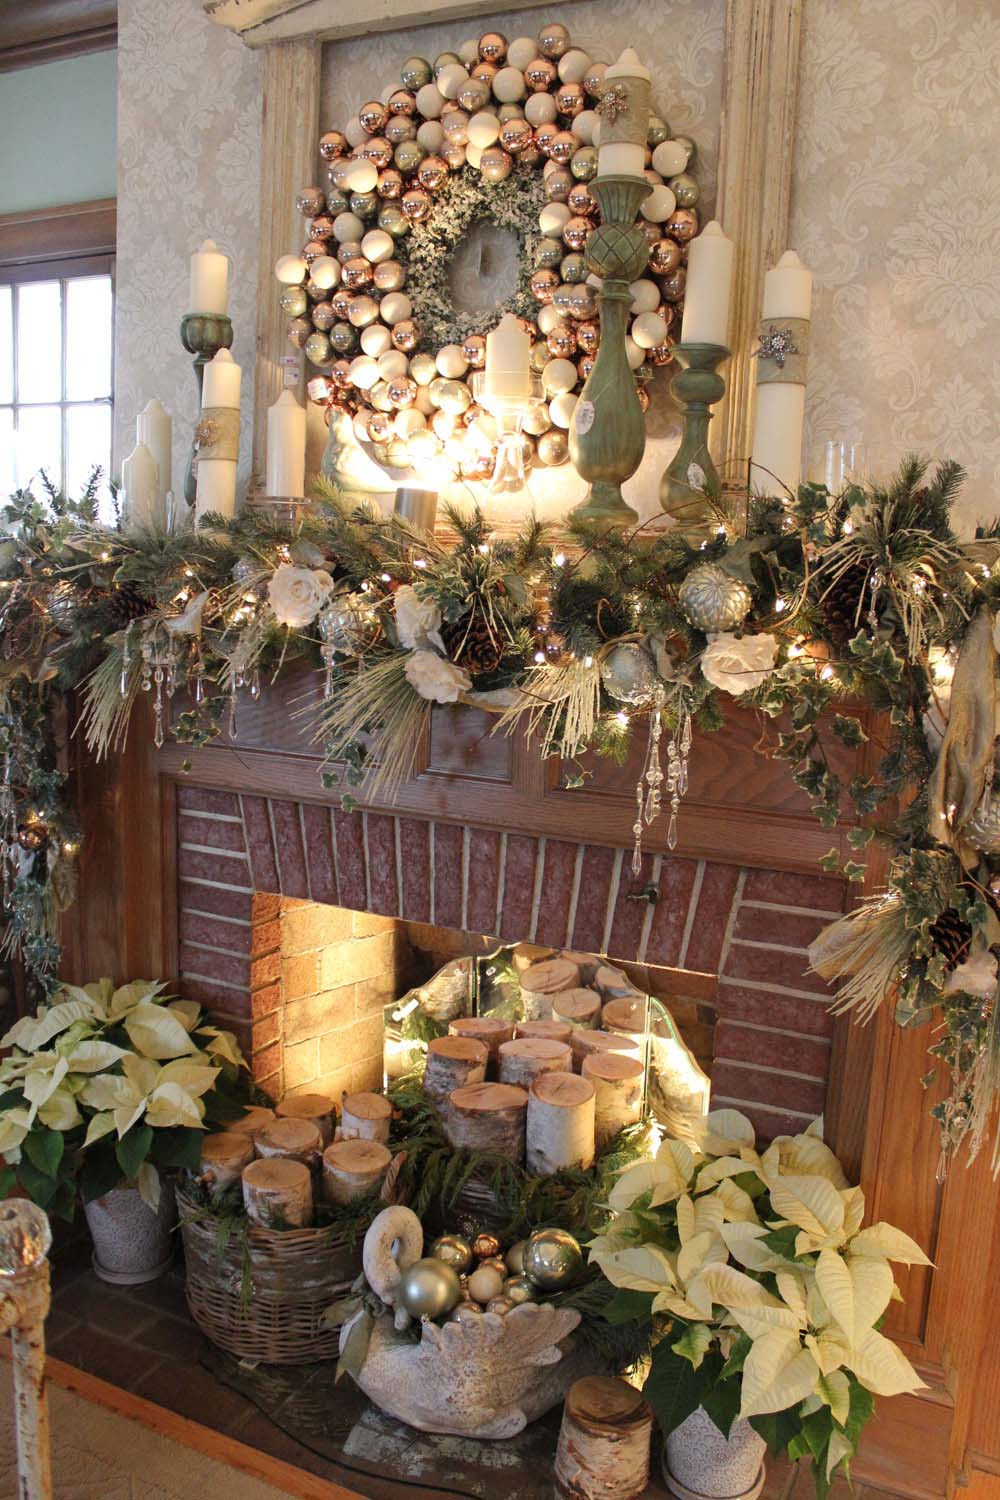 Fireplace Decorations For Christmas
 50 Christmas Mantel Decorations that are Sure to Grab